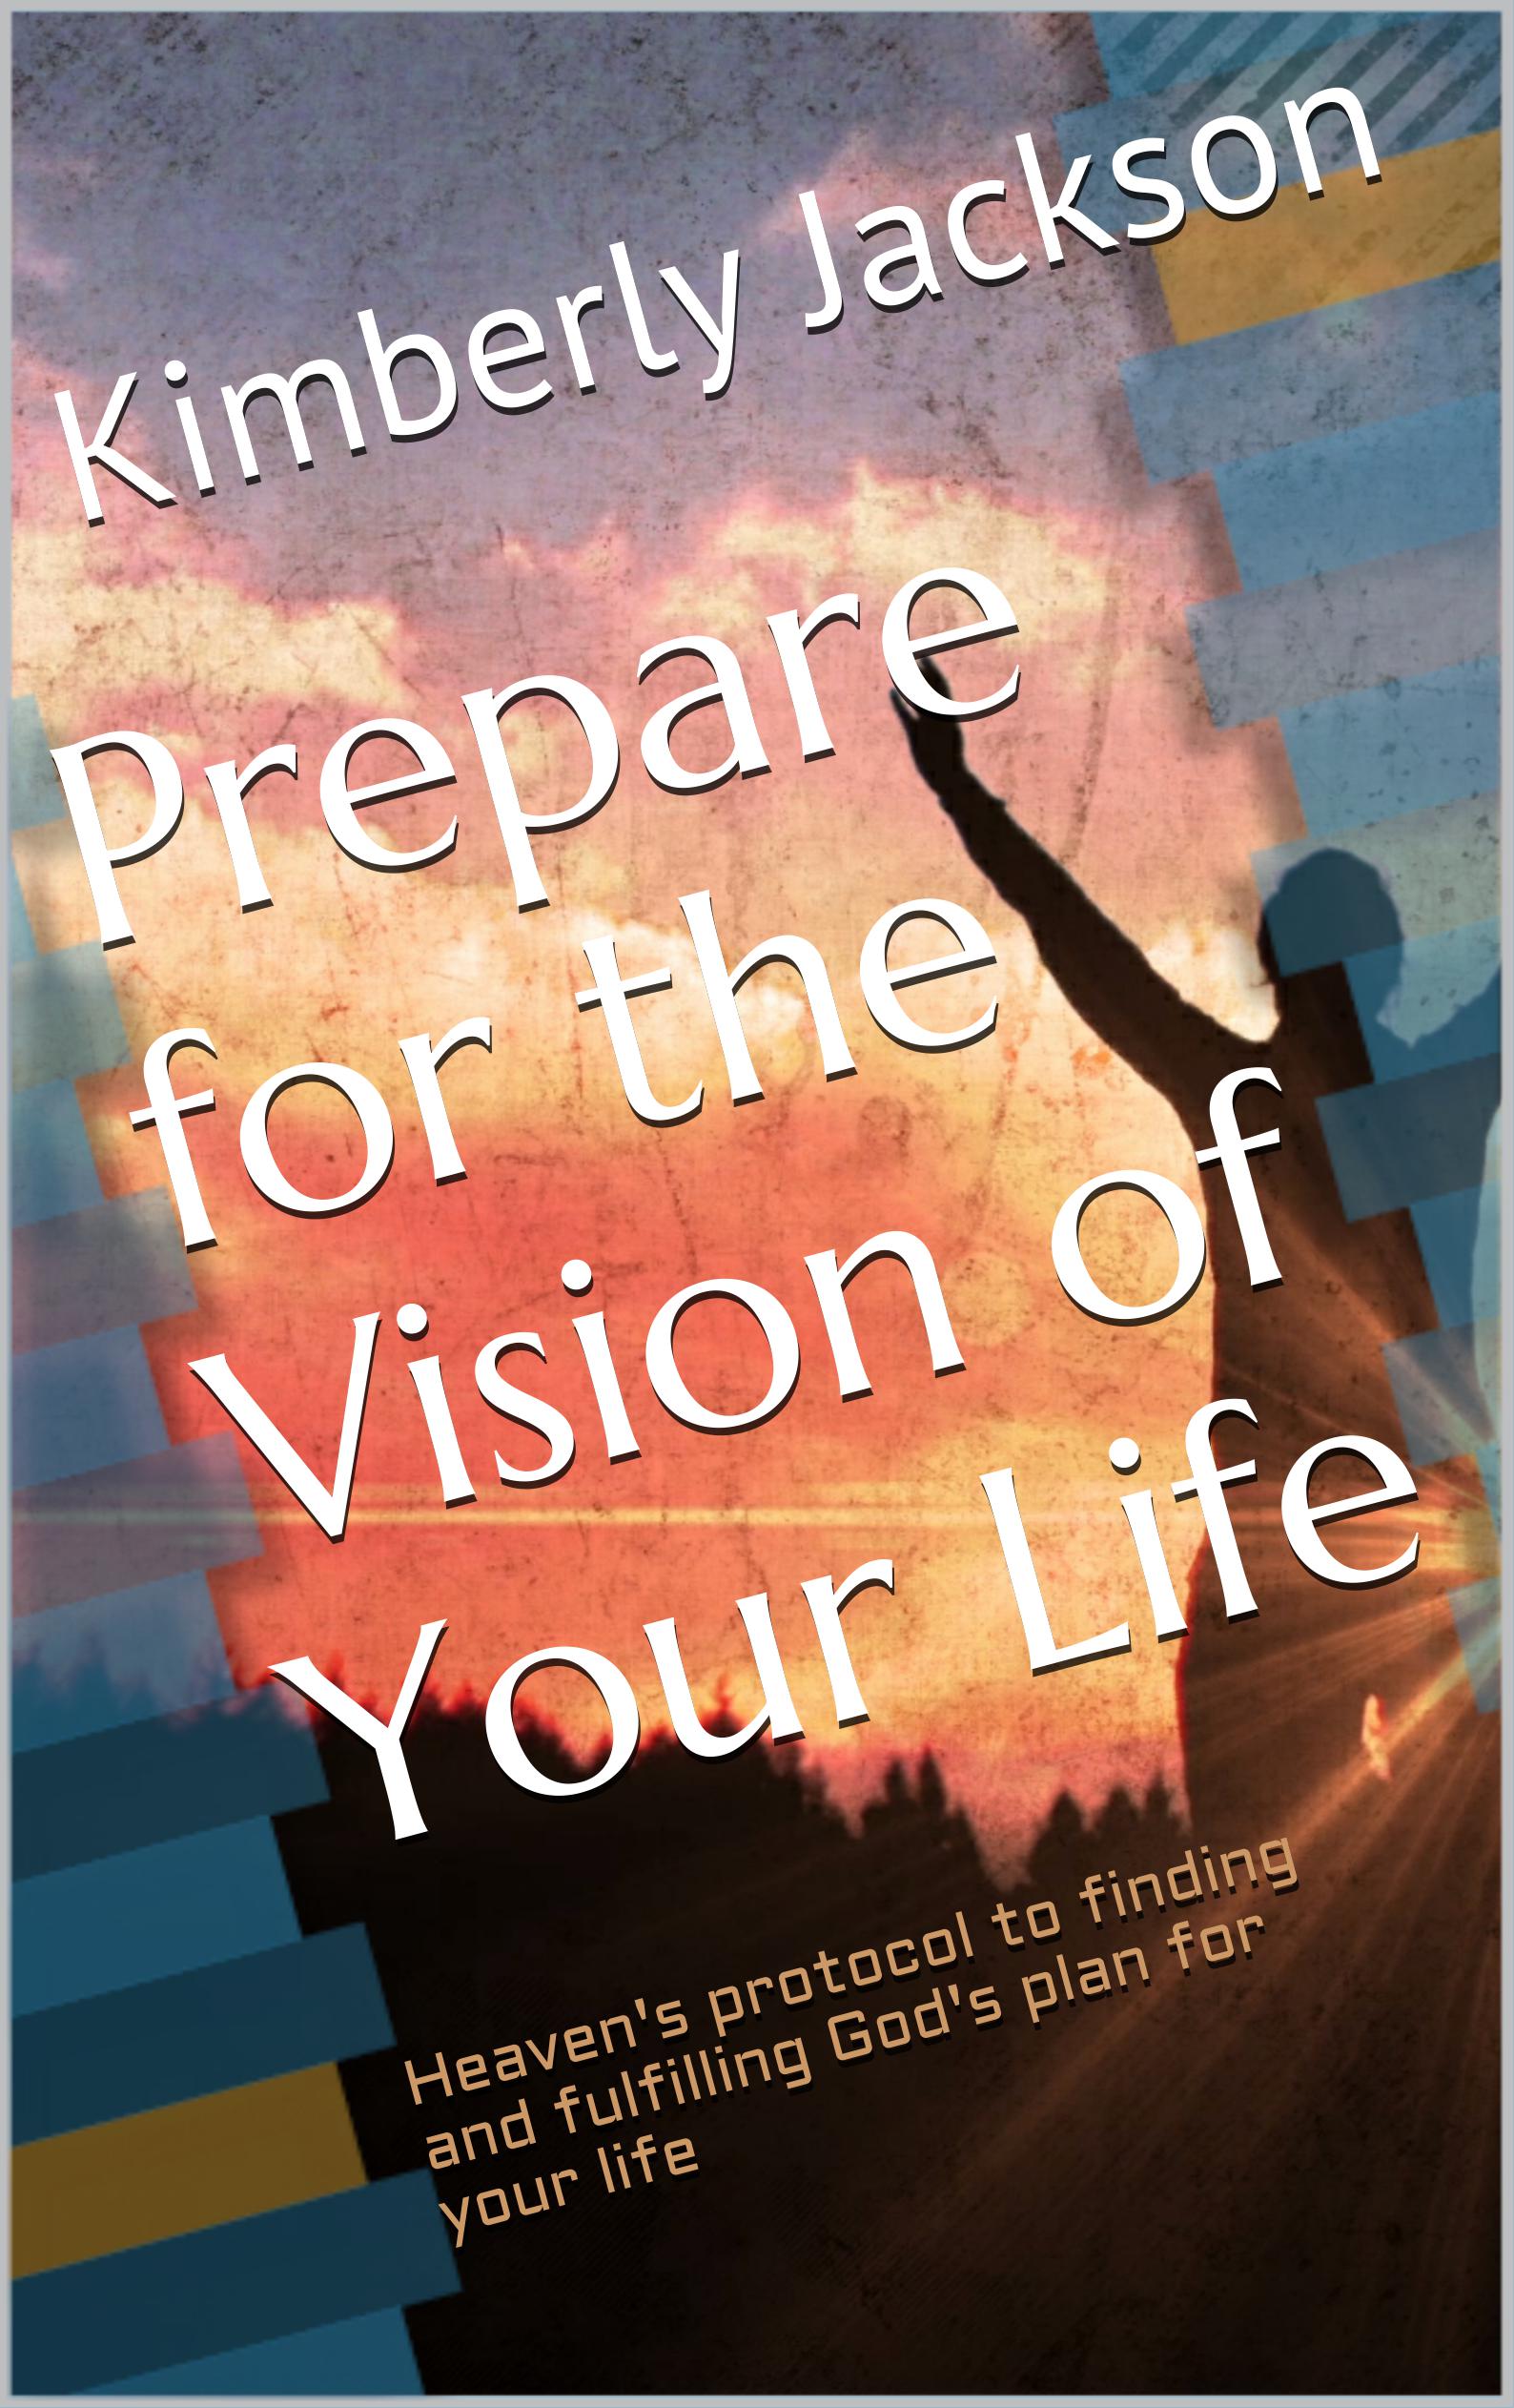 Prepare for the Vision of Your Life